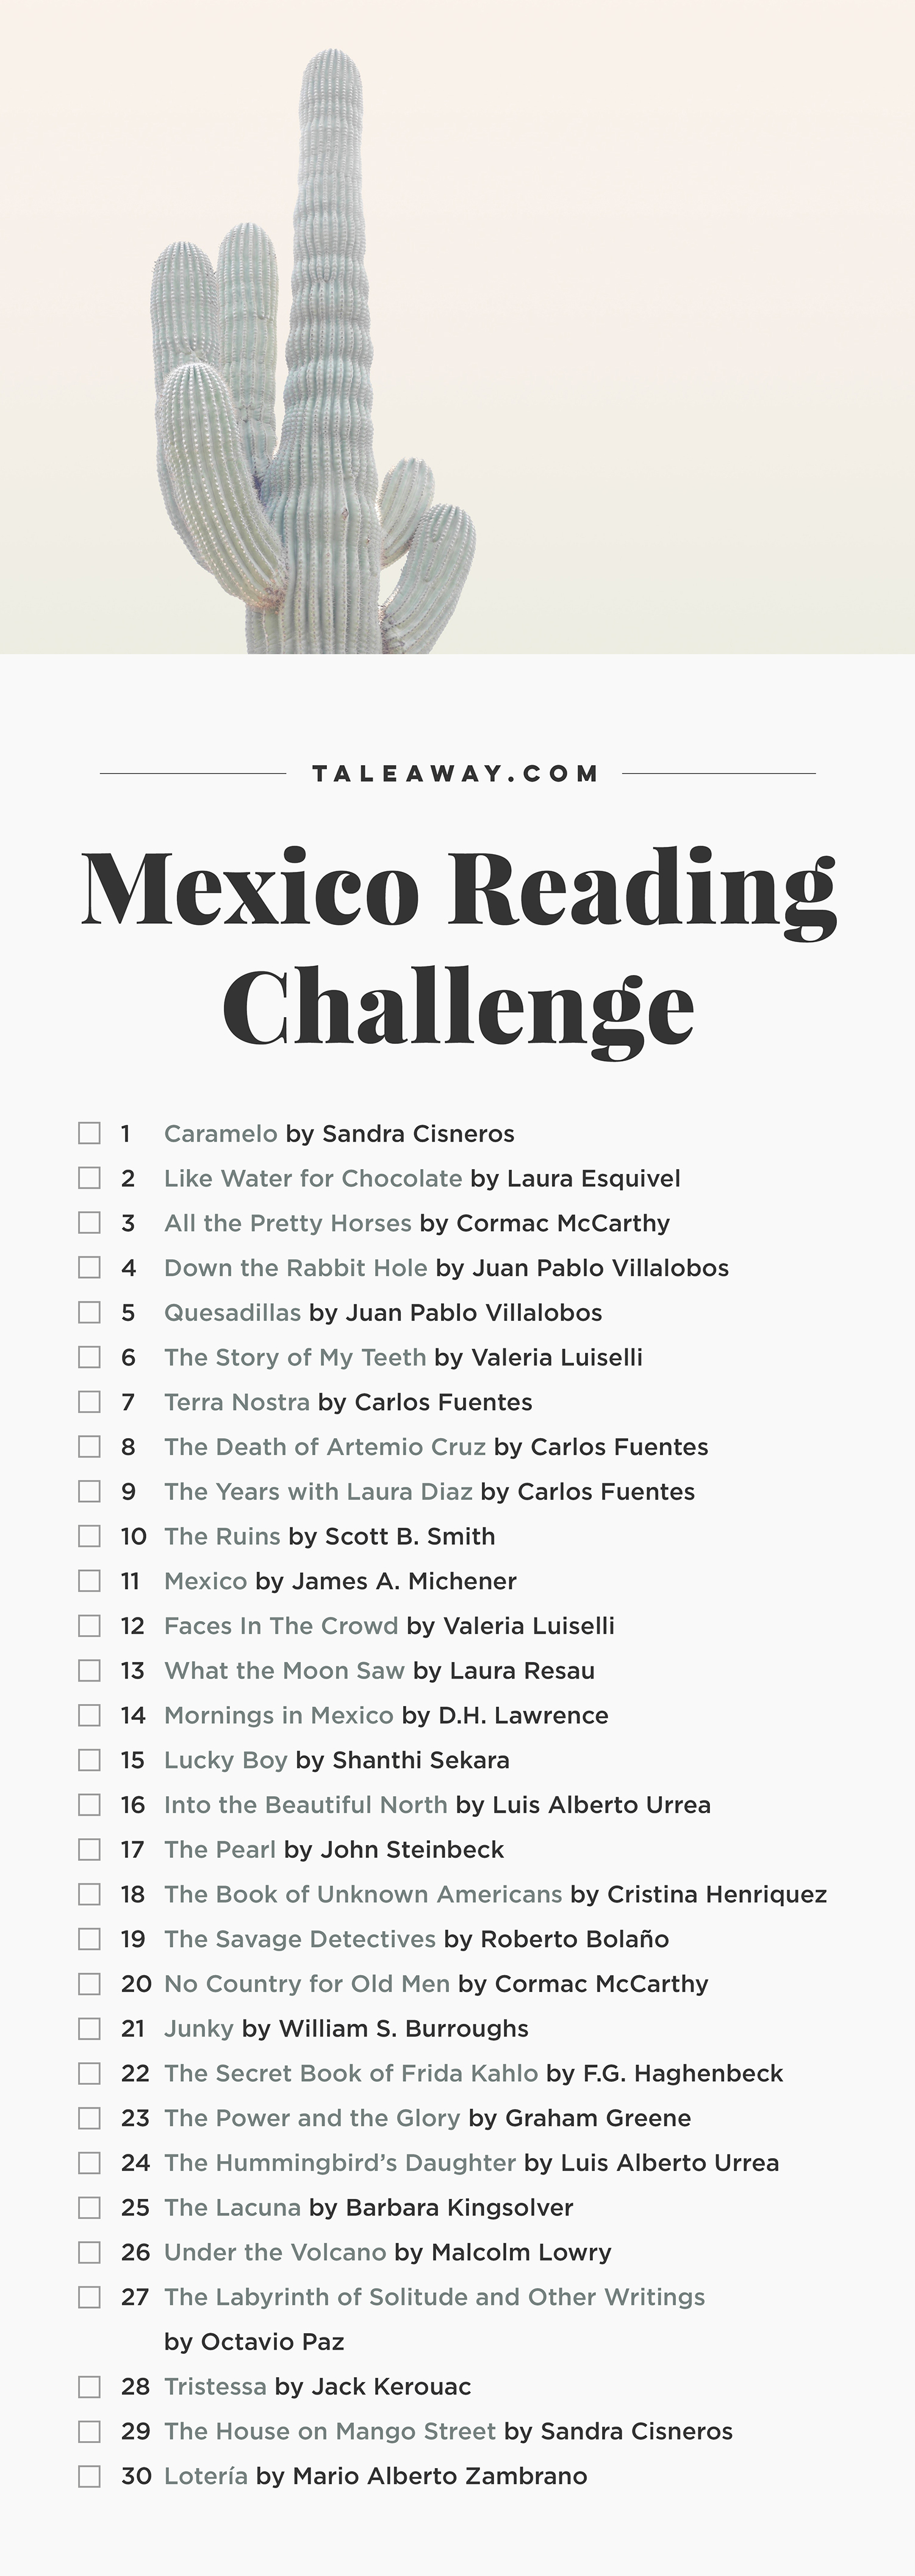 Mexico Reading Challenge, Books Set In Mexico - For more books visit www.taleway.com to find books set around the world. Ideas for those who like to travel, both in life and in fiction. reading challenge, mexico reading challenge, book challenge, books you must read, books from around the world, world books, books and travel, travel reading list, reading list, books around the world, books to read, mexico books, mexico books novels, mexico travel